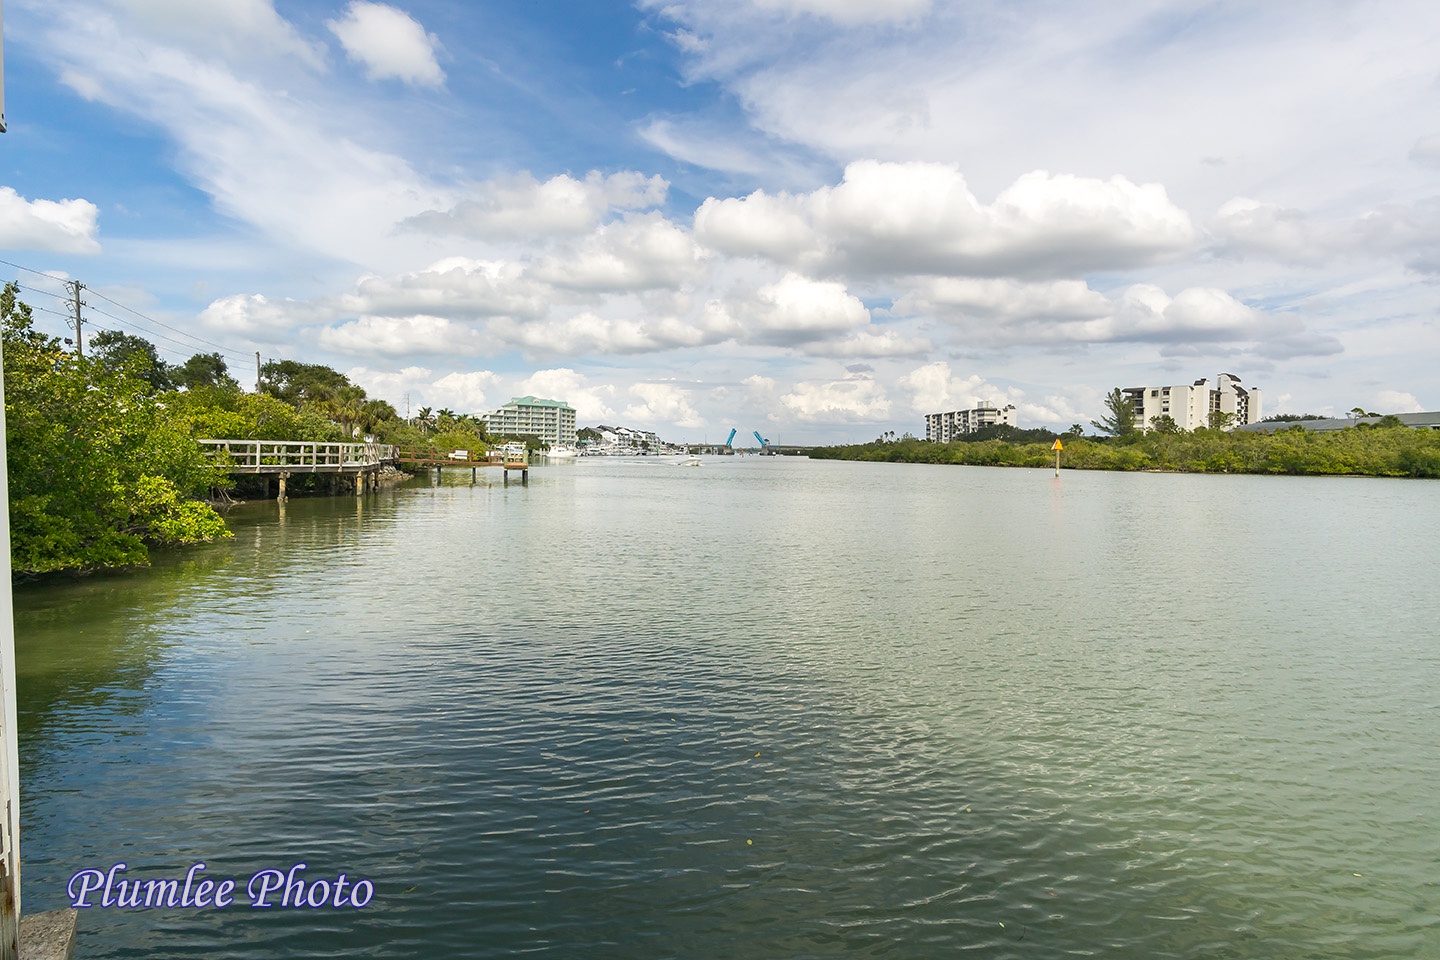 Looking north on the Intracoastal Waterway you can see the Indian Rocks Beach Drawbridge.